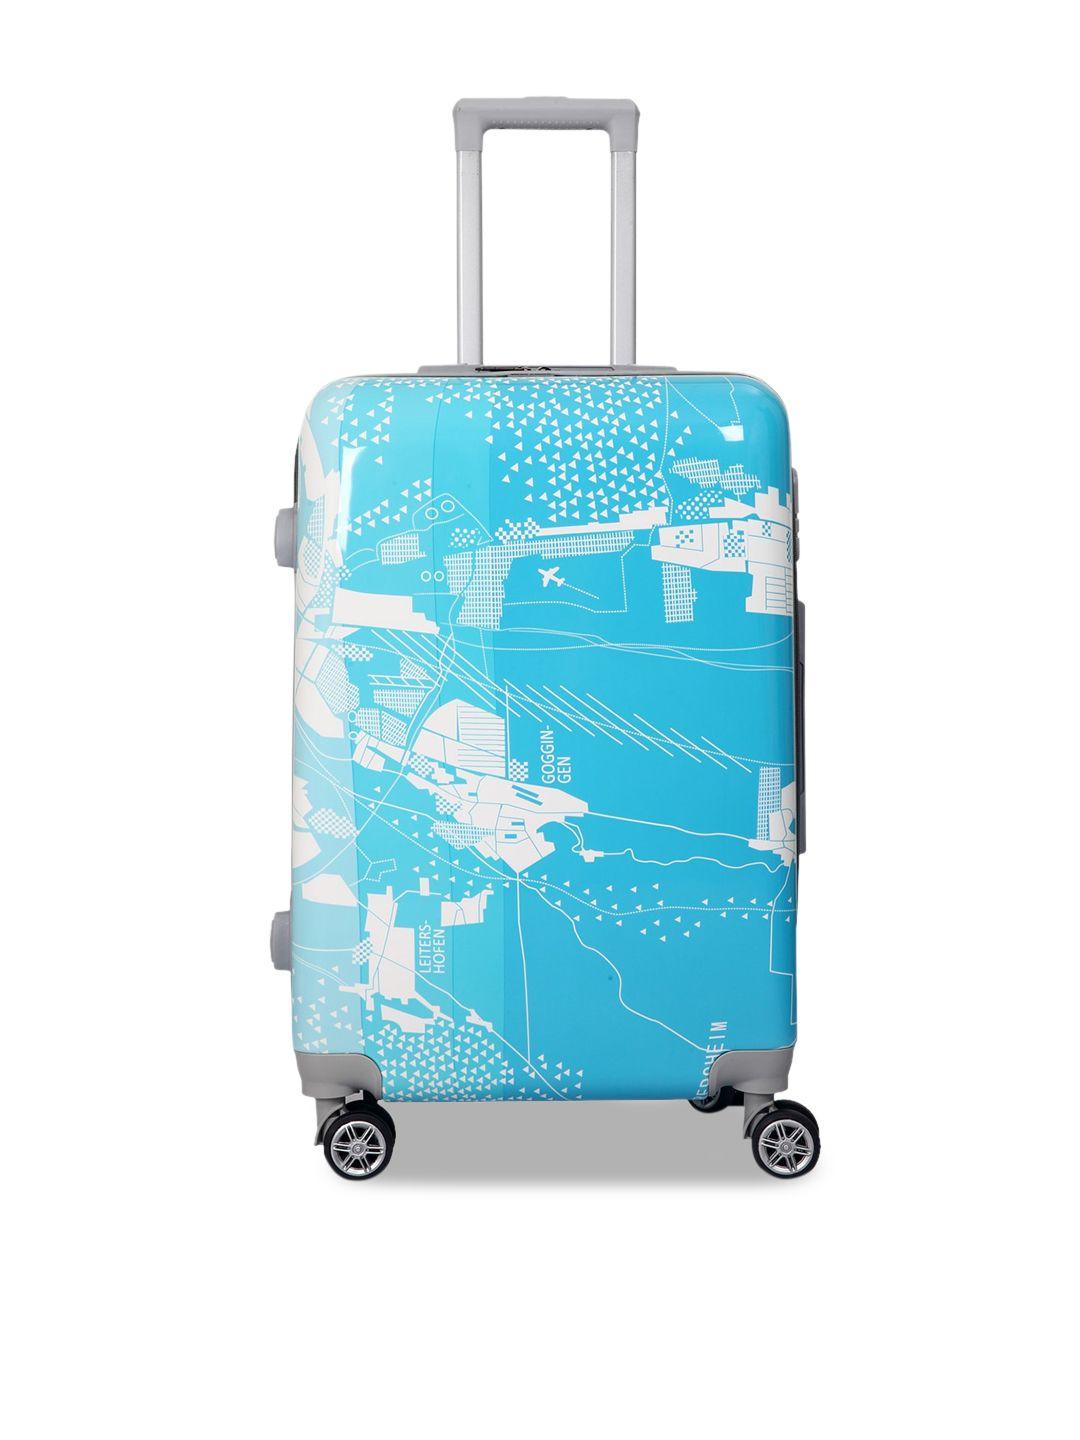 polo class blue & white printed 20 inch trolley bag